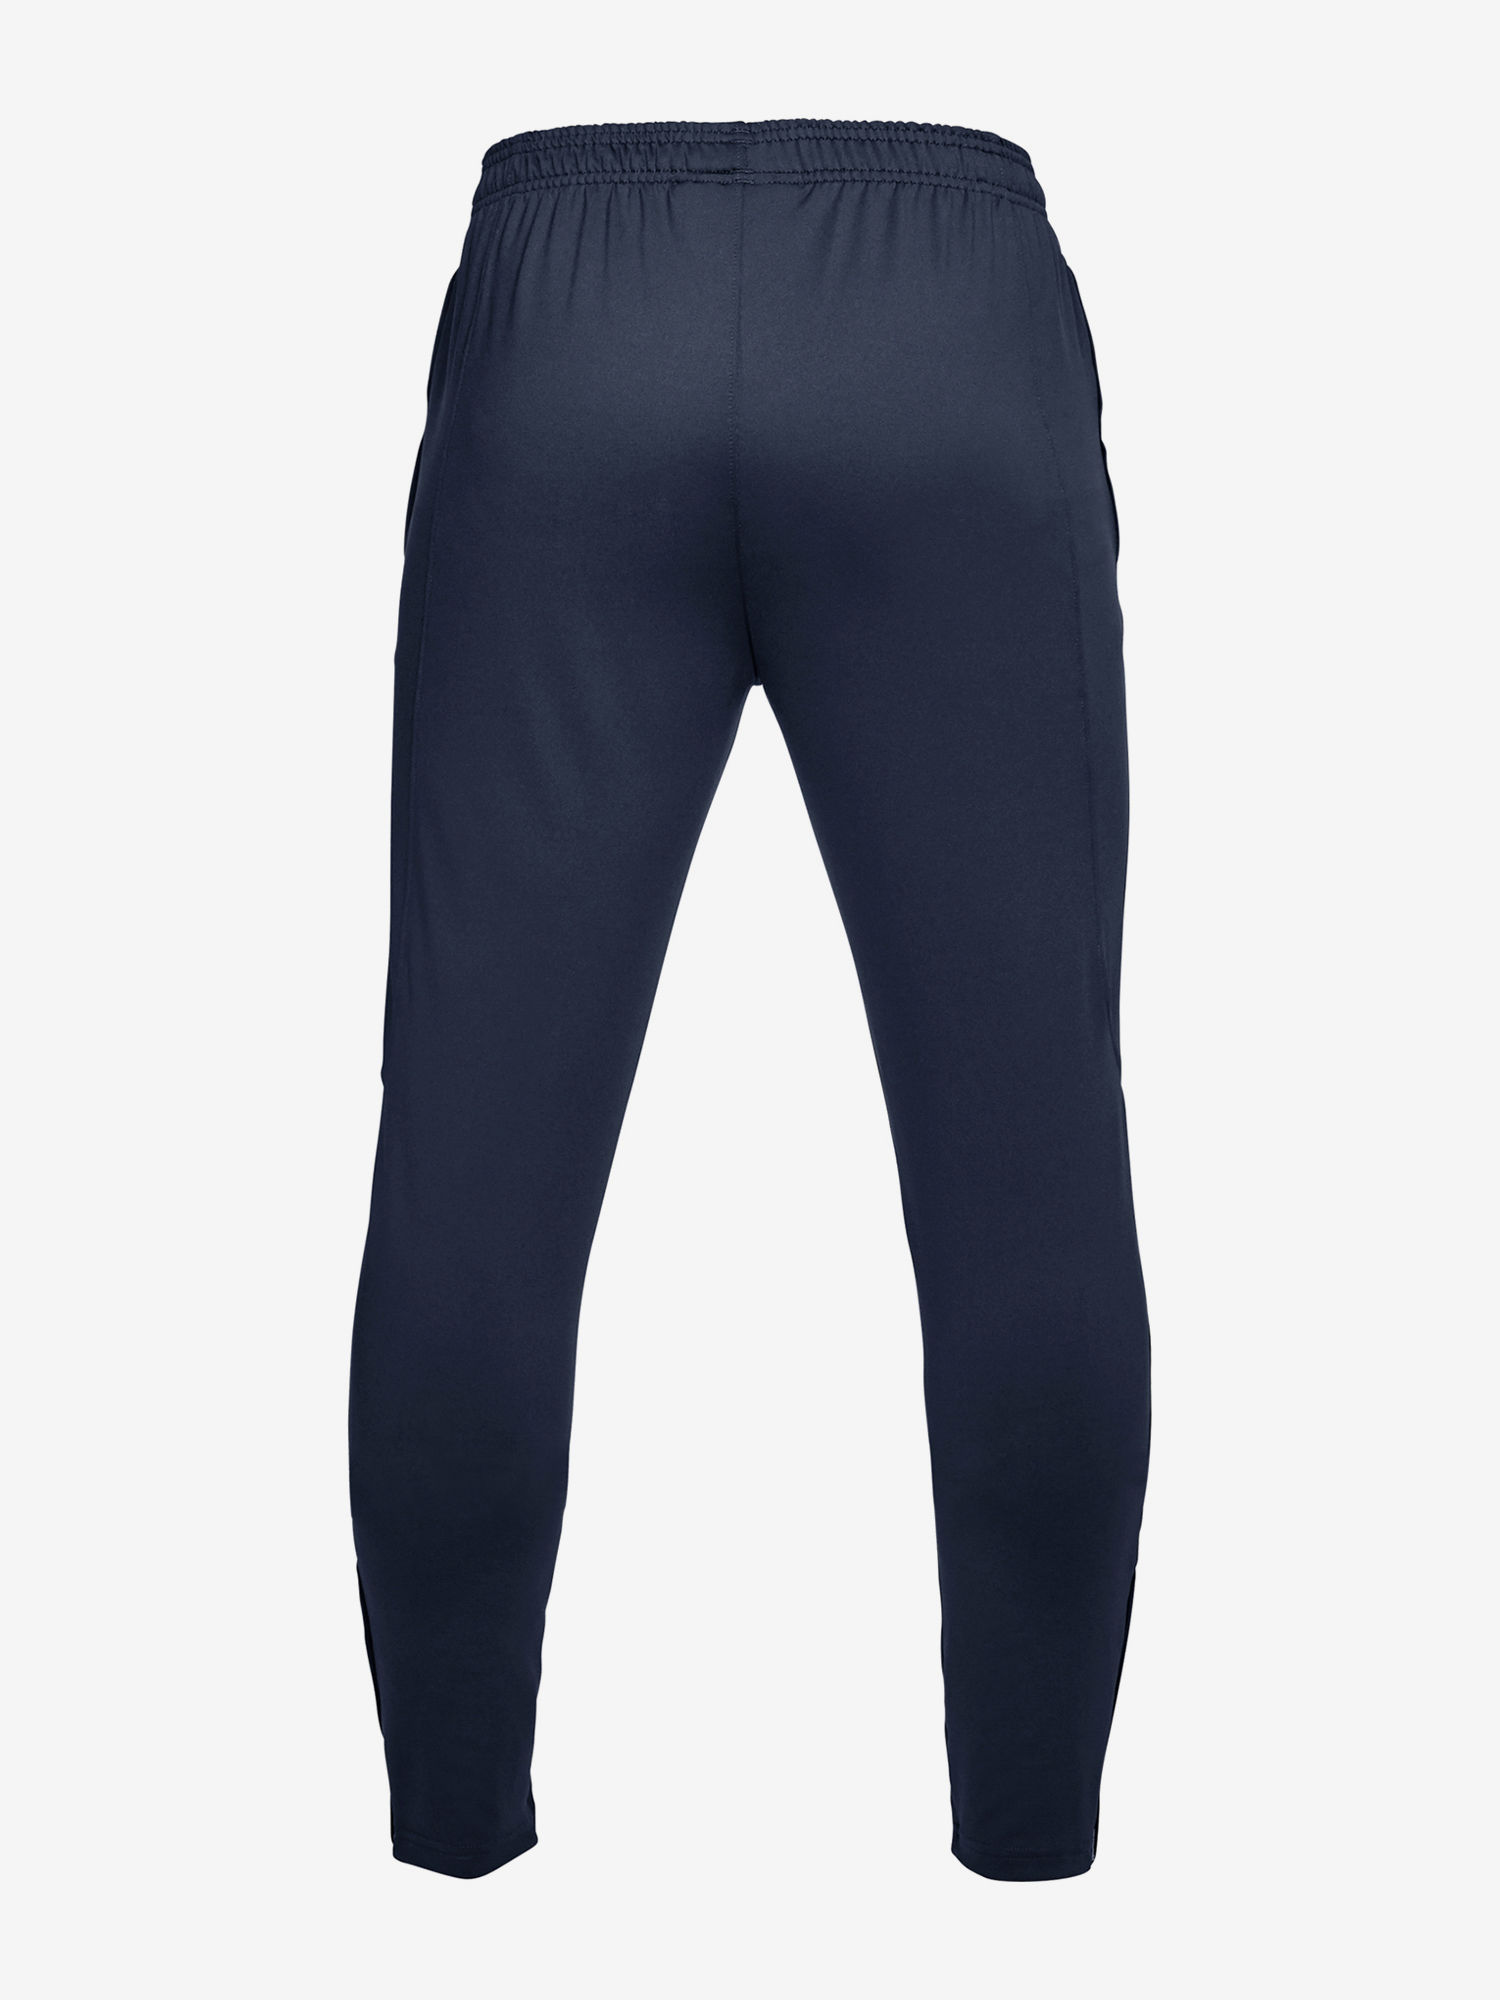 Tepláky Under Armour Challenger II Training Pant-NVY (4)